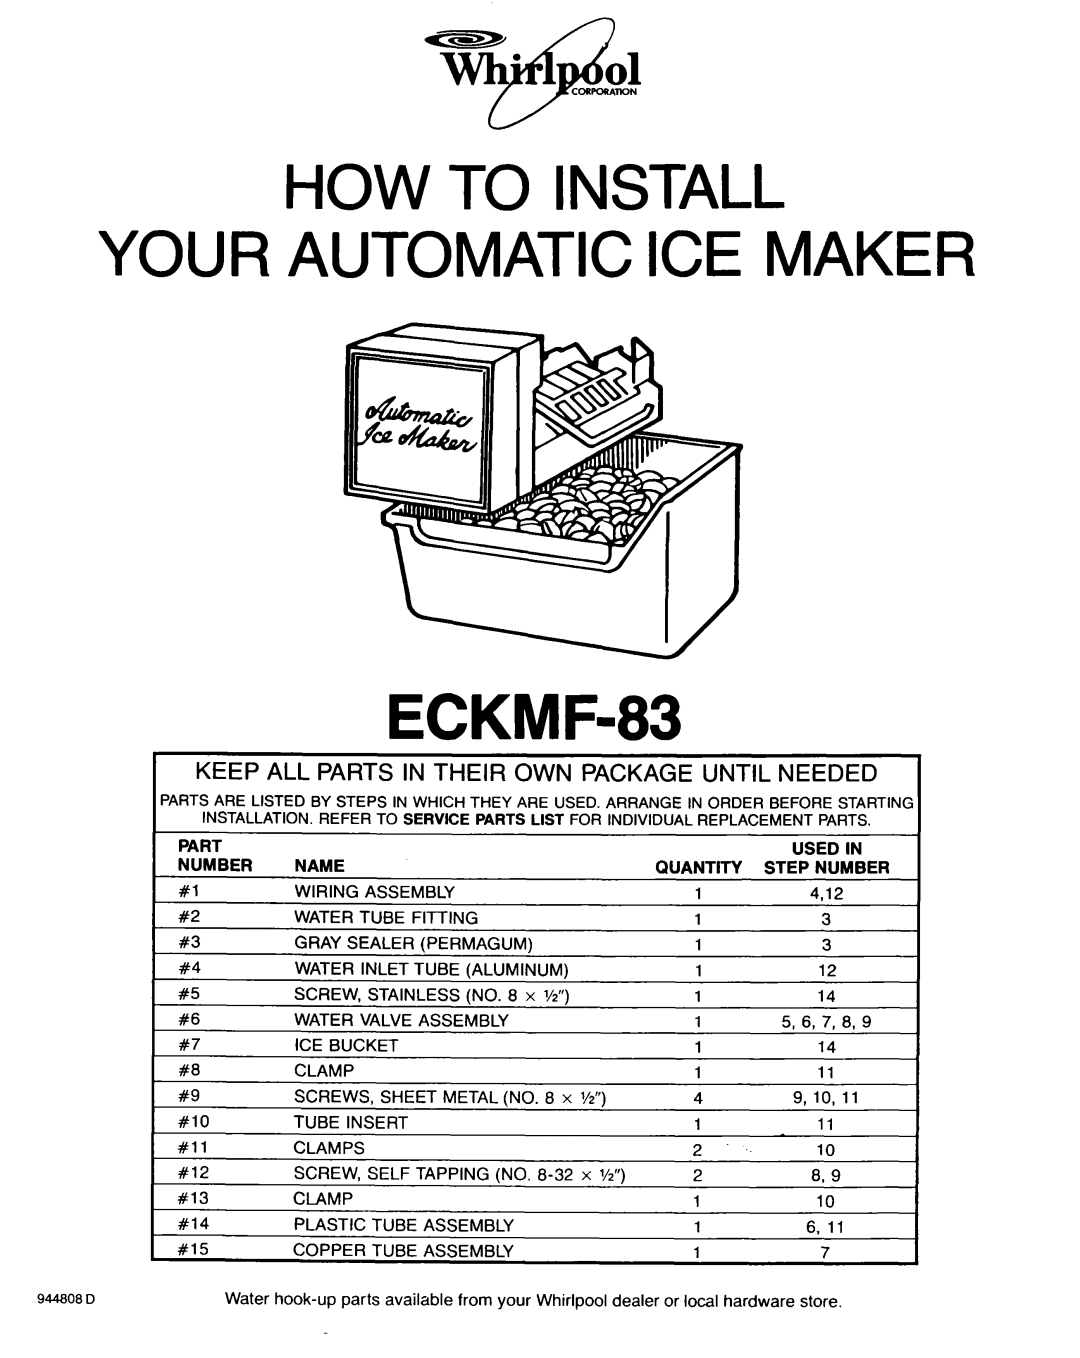 Whirlpool manual HOW TO INSTALL YOUR AUTOMATIC ICE MAKER ECKMF-83 